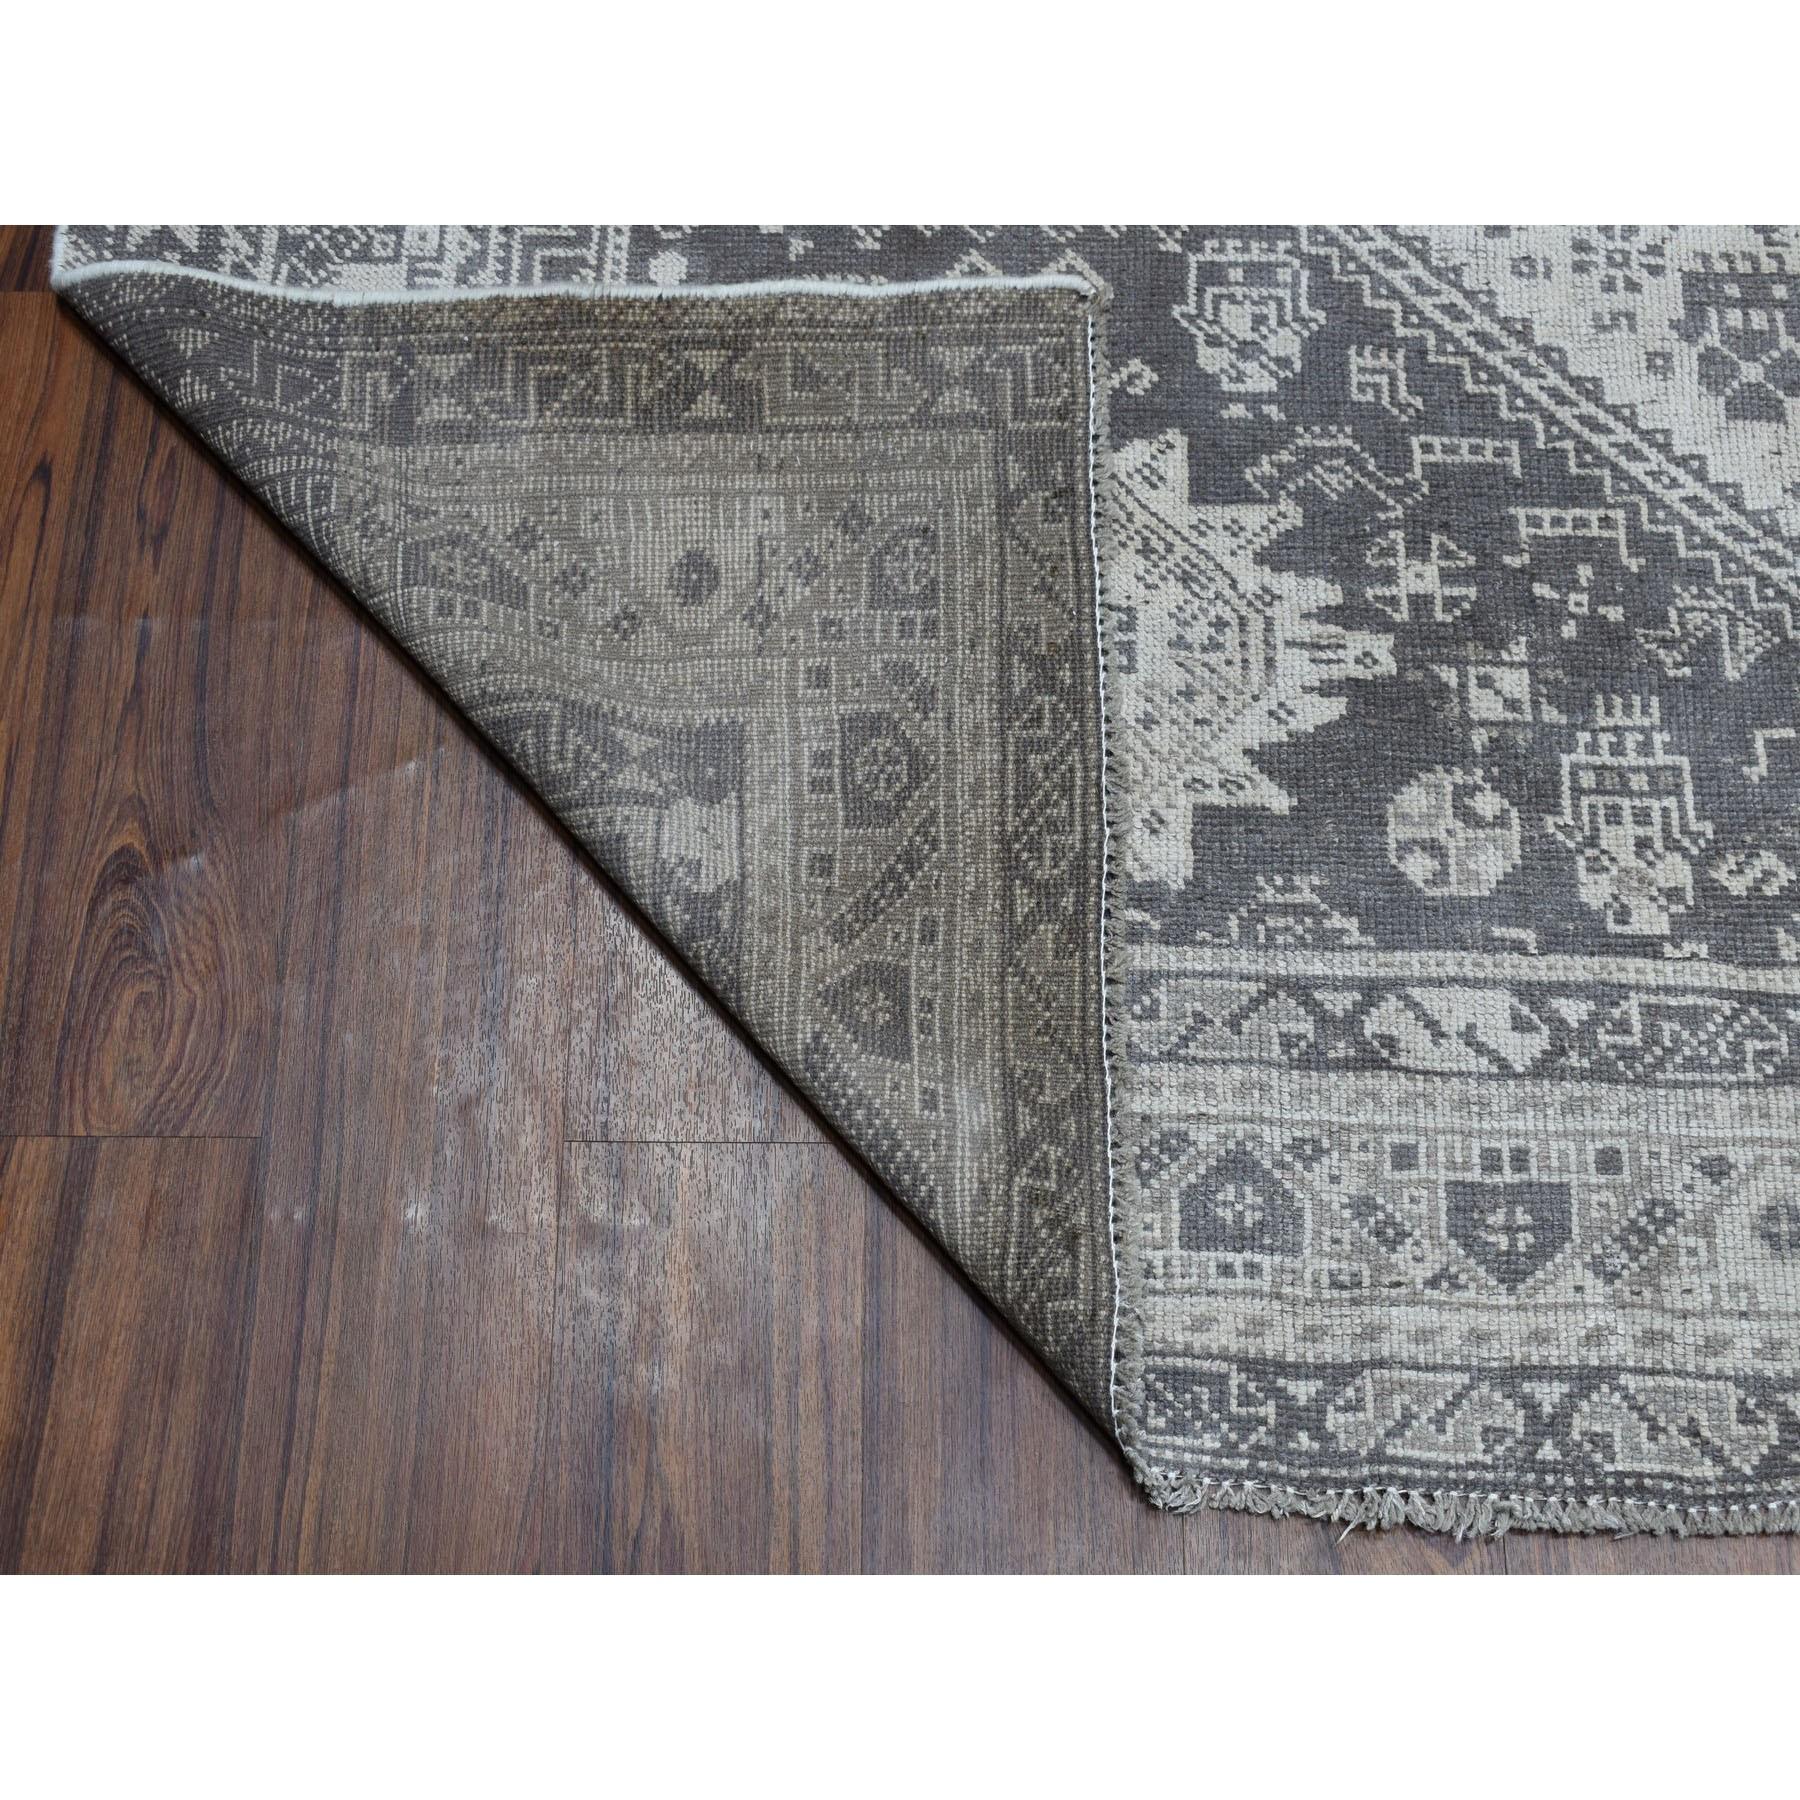 Medieval Vintage And Worn Down Distressed Colors Persian Shiraz Hand Knotted Bohemian Rug For Sale